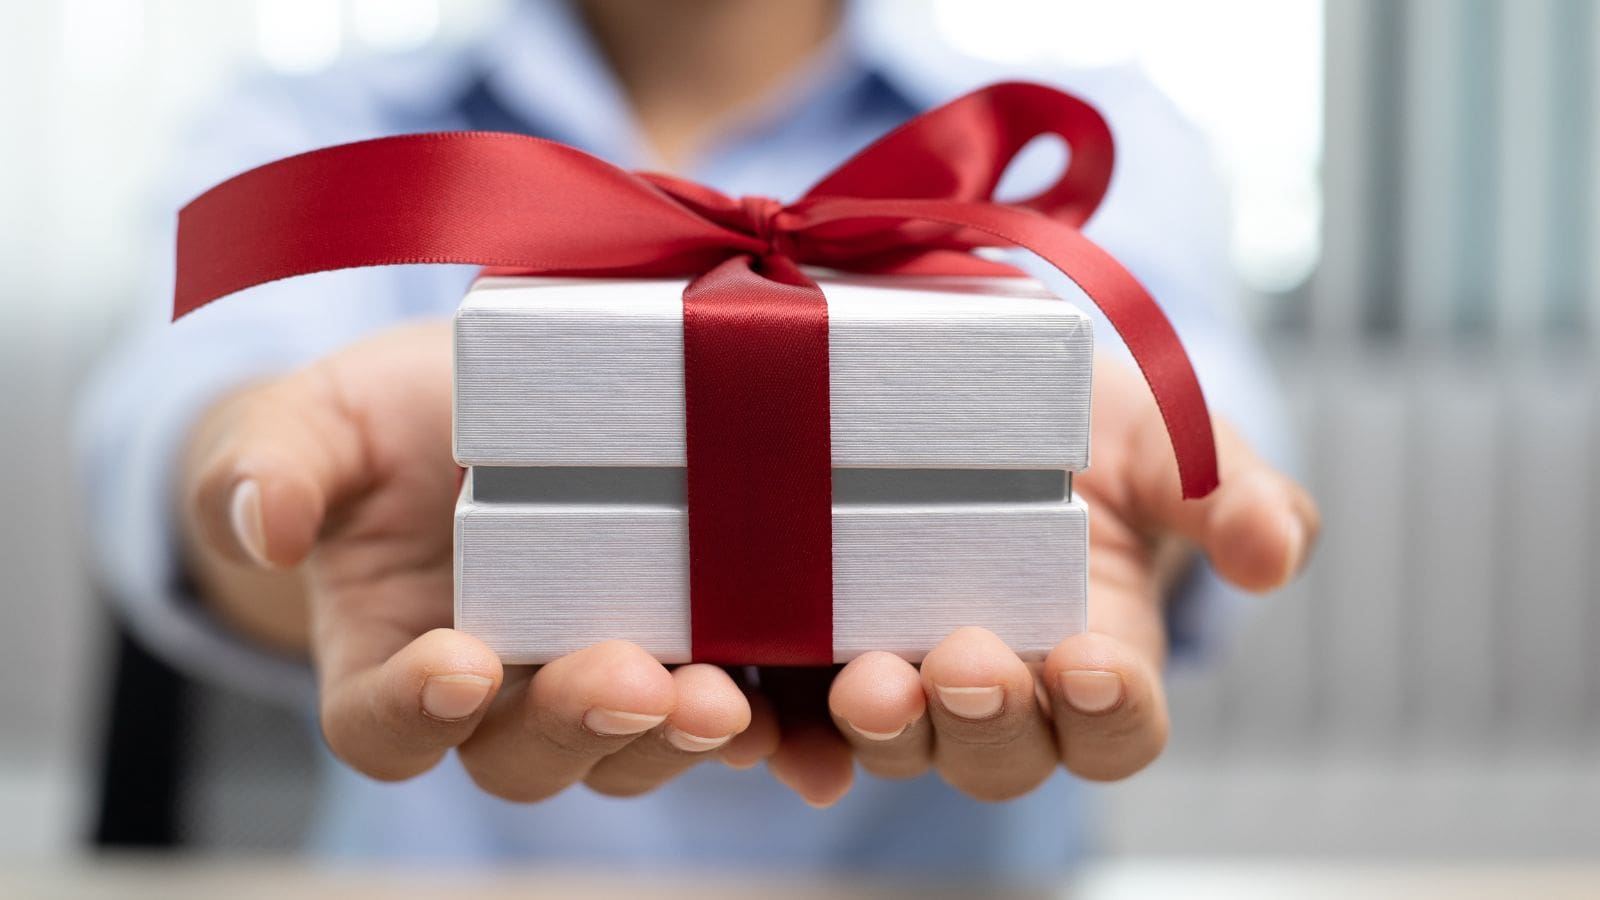 20 Corporate Gift Ideas for Employees on a Budget | Babbel for Business